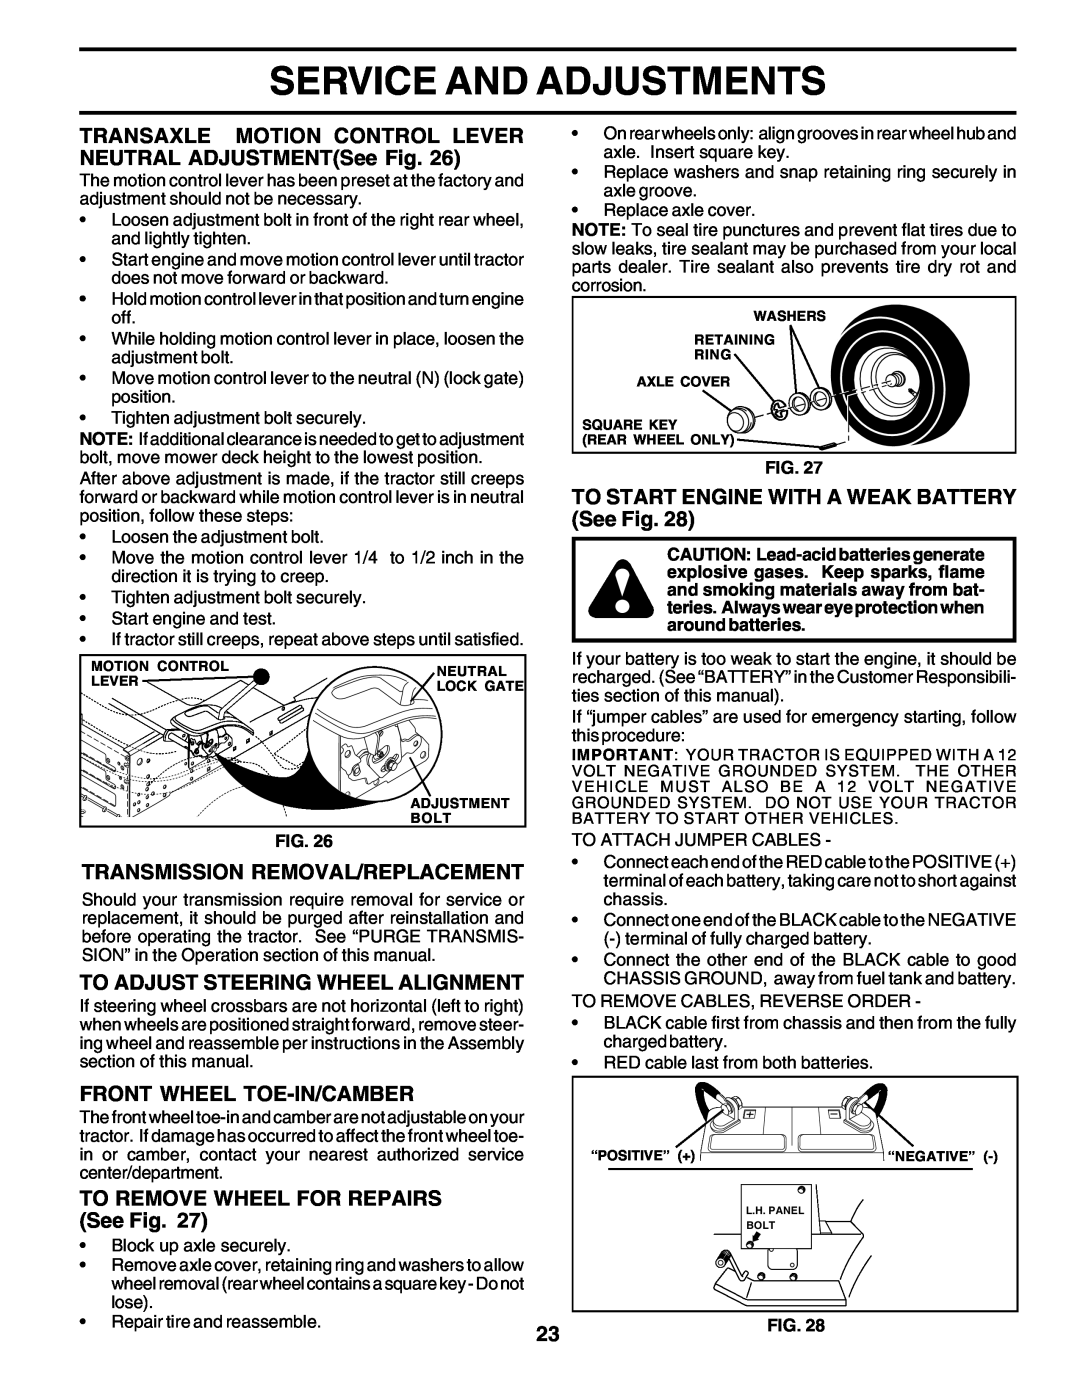 Weed Eater 178387 owner manual Service And Adjustments, TRANSAXLE MOTION CONTROL LEVER NEUTRAL ADJUSTMENTSee Fig 